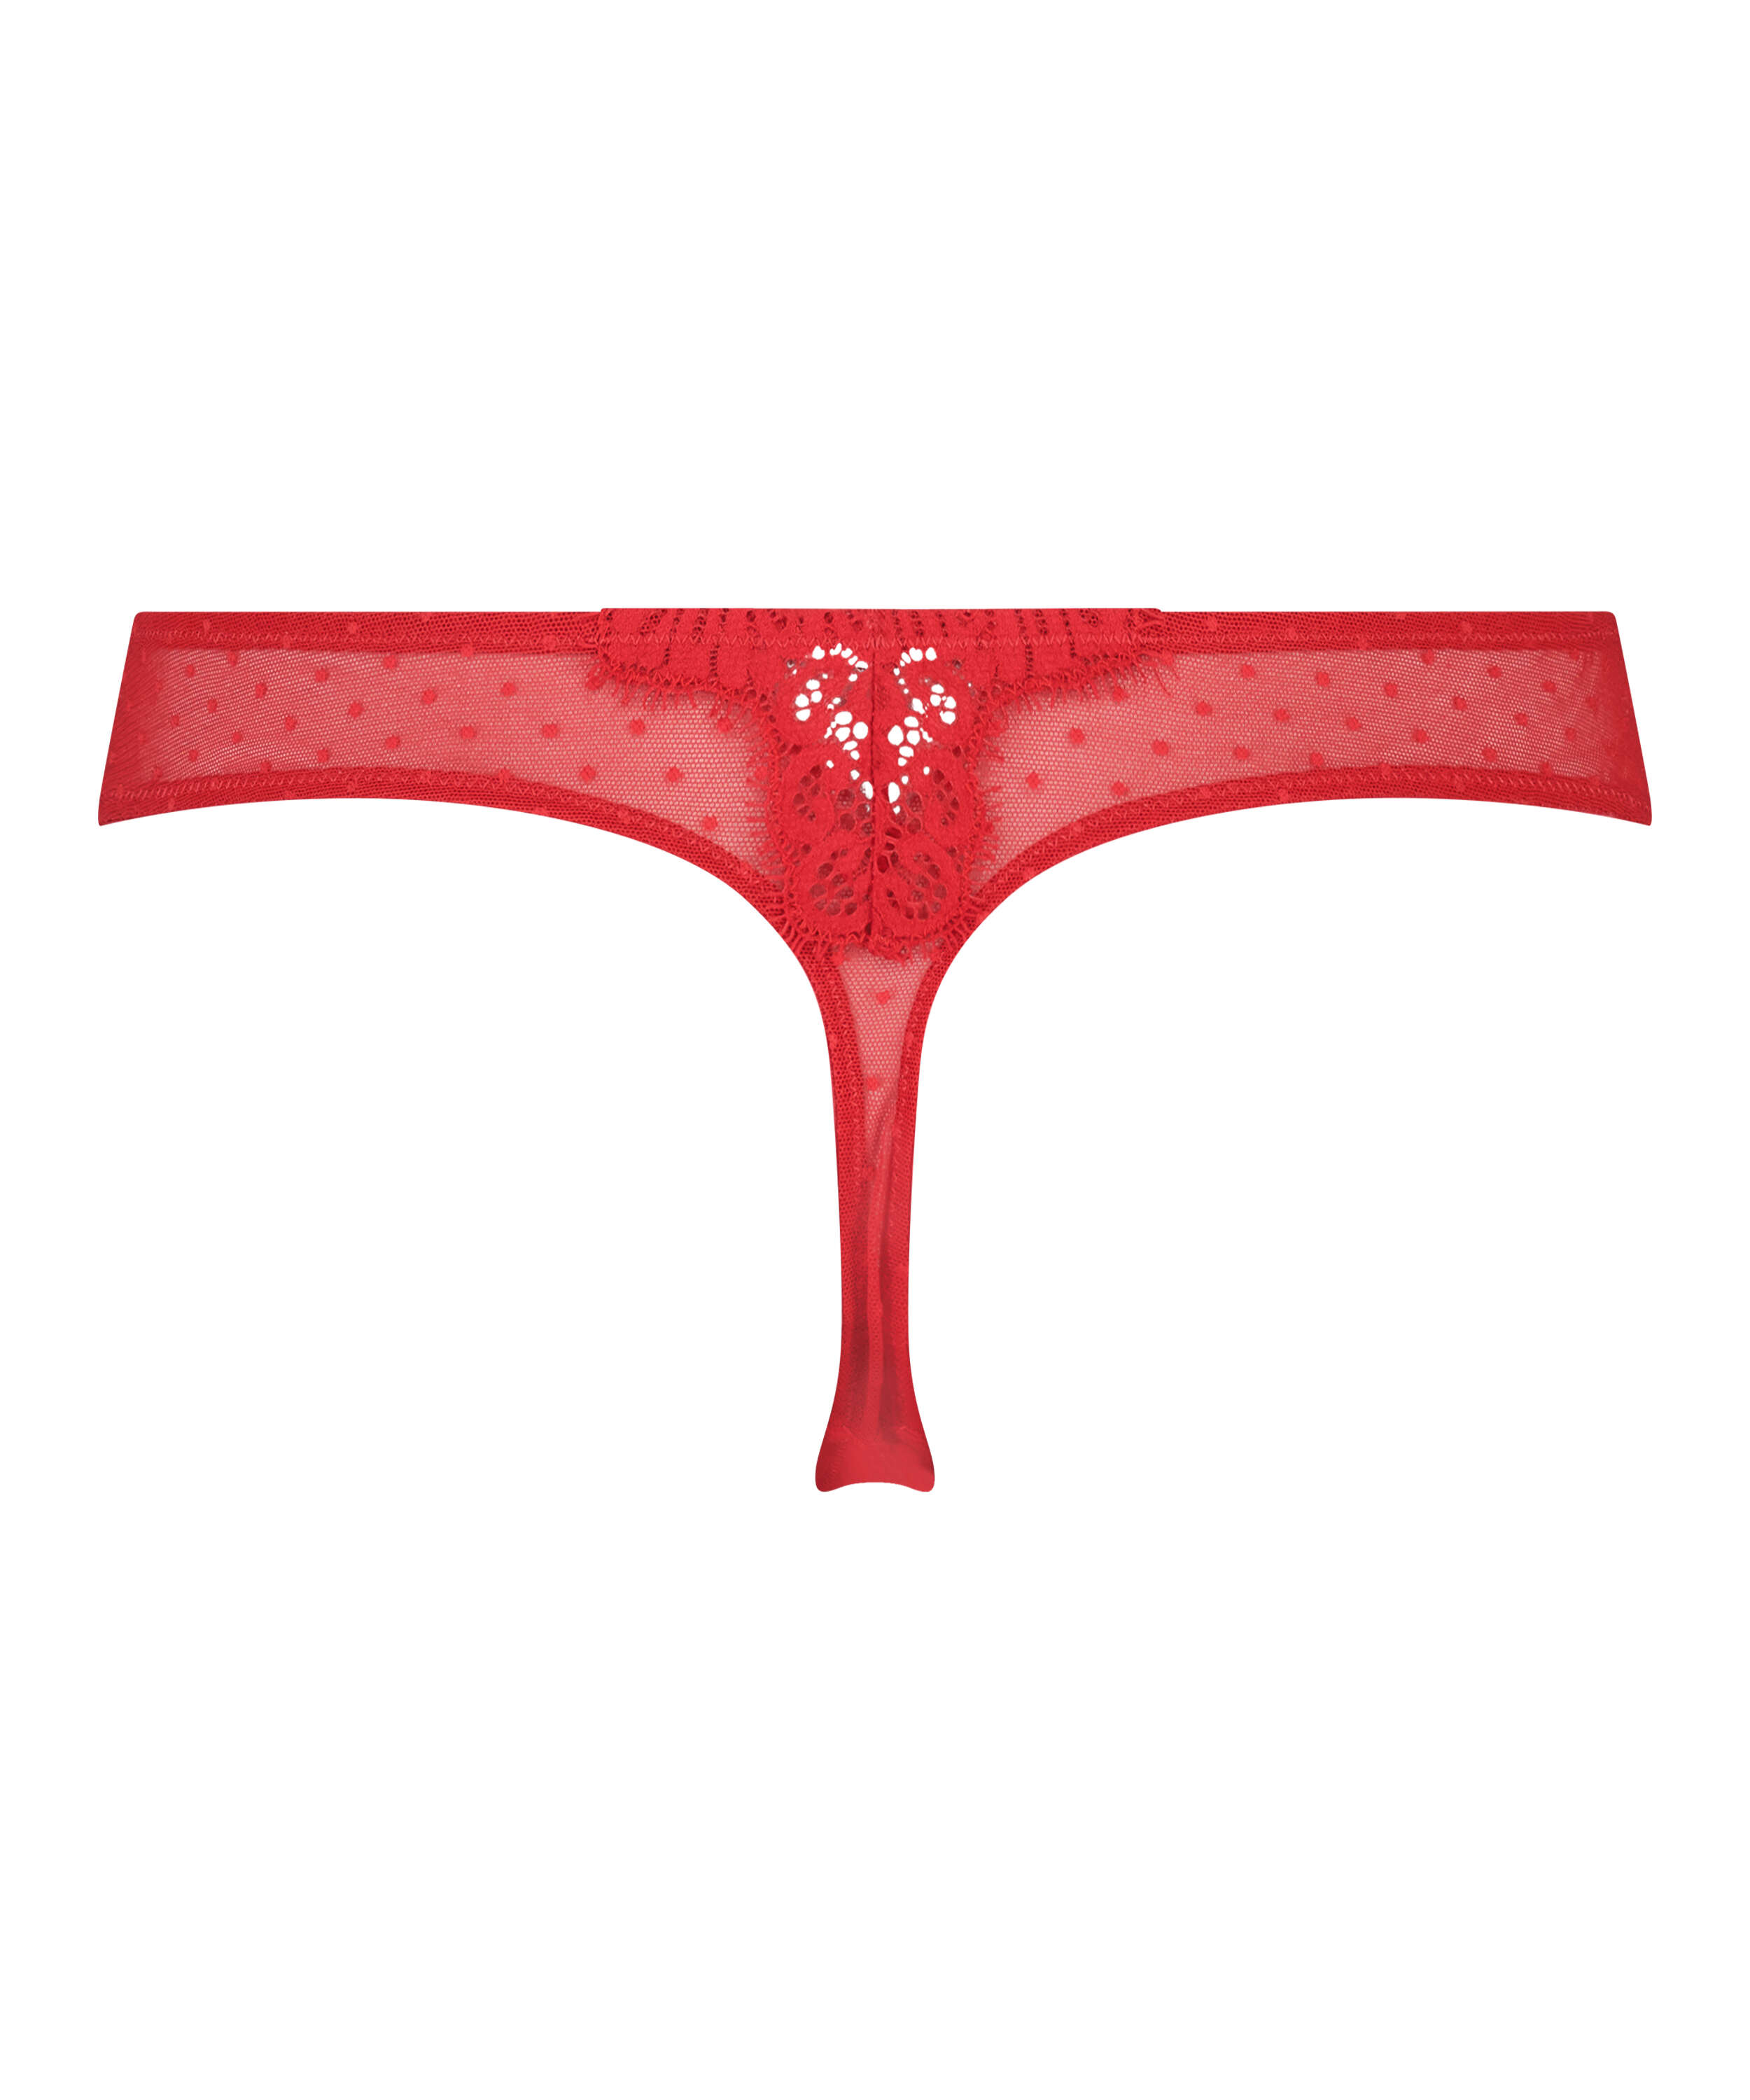 Marilee Thong , Red, main